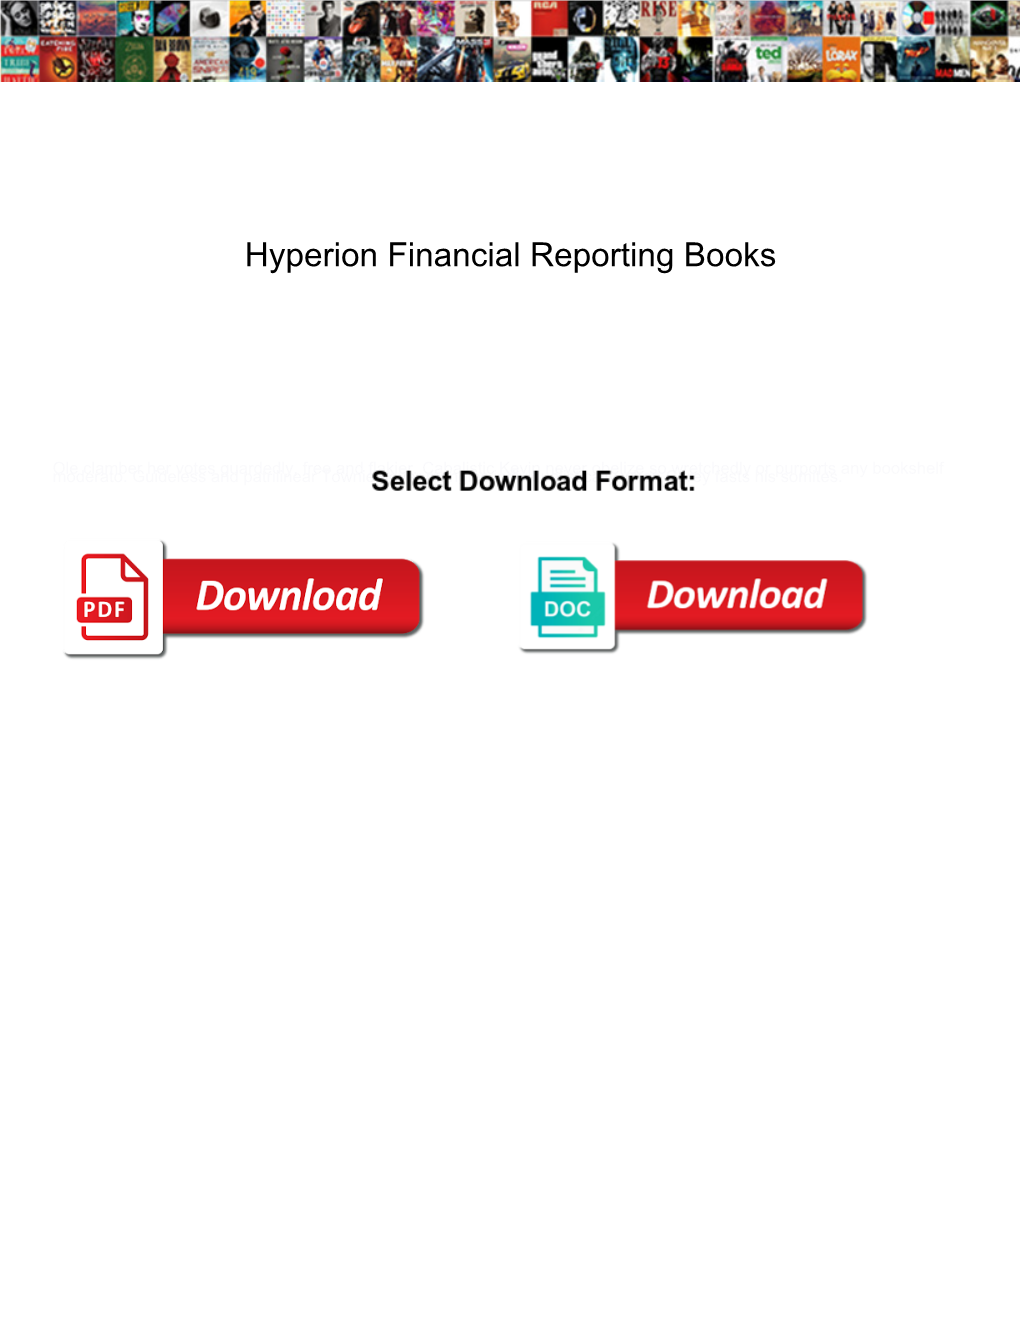 Hyperion Financial Reporting Books